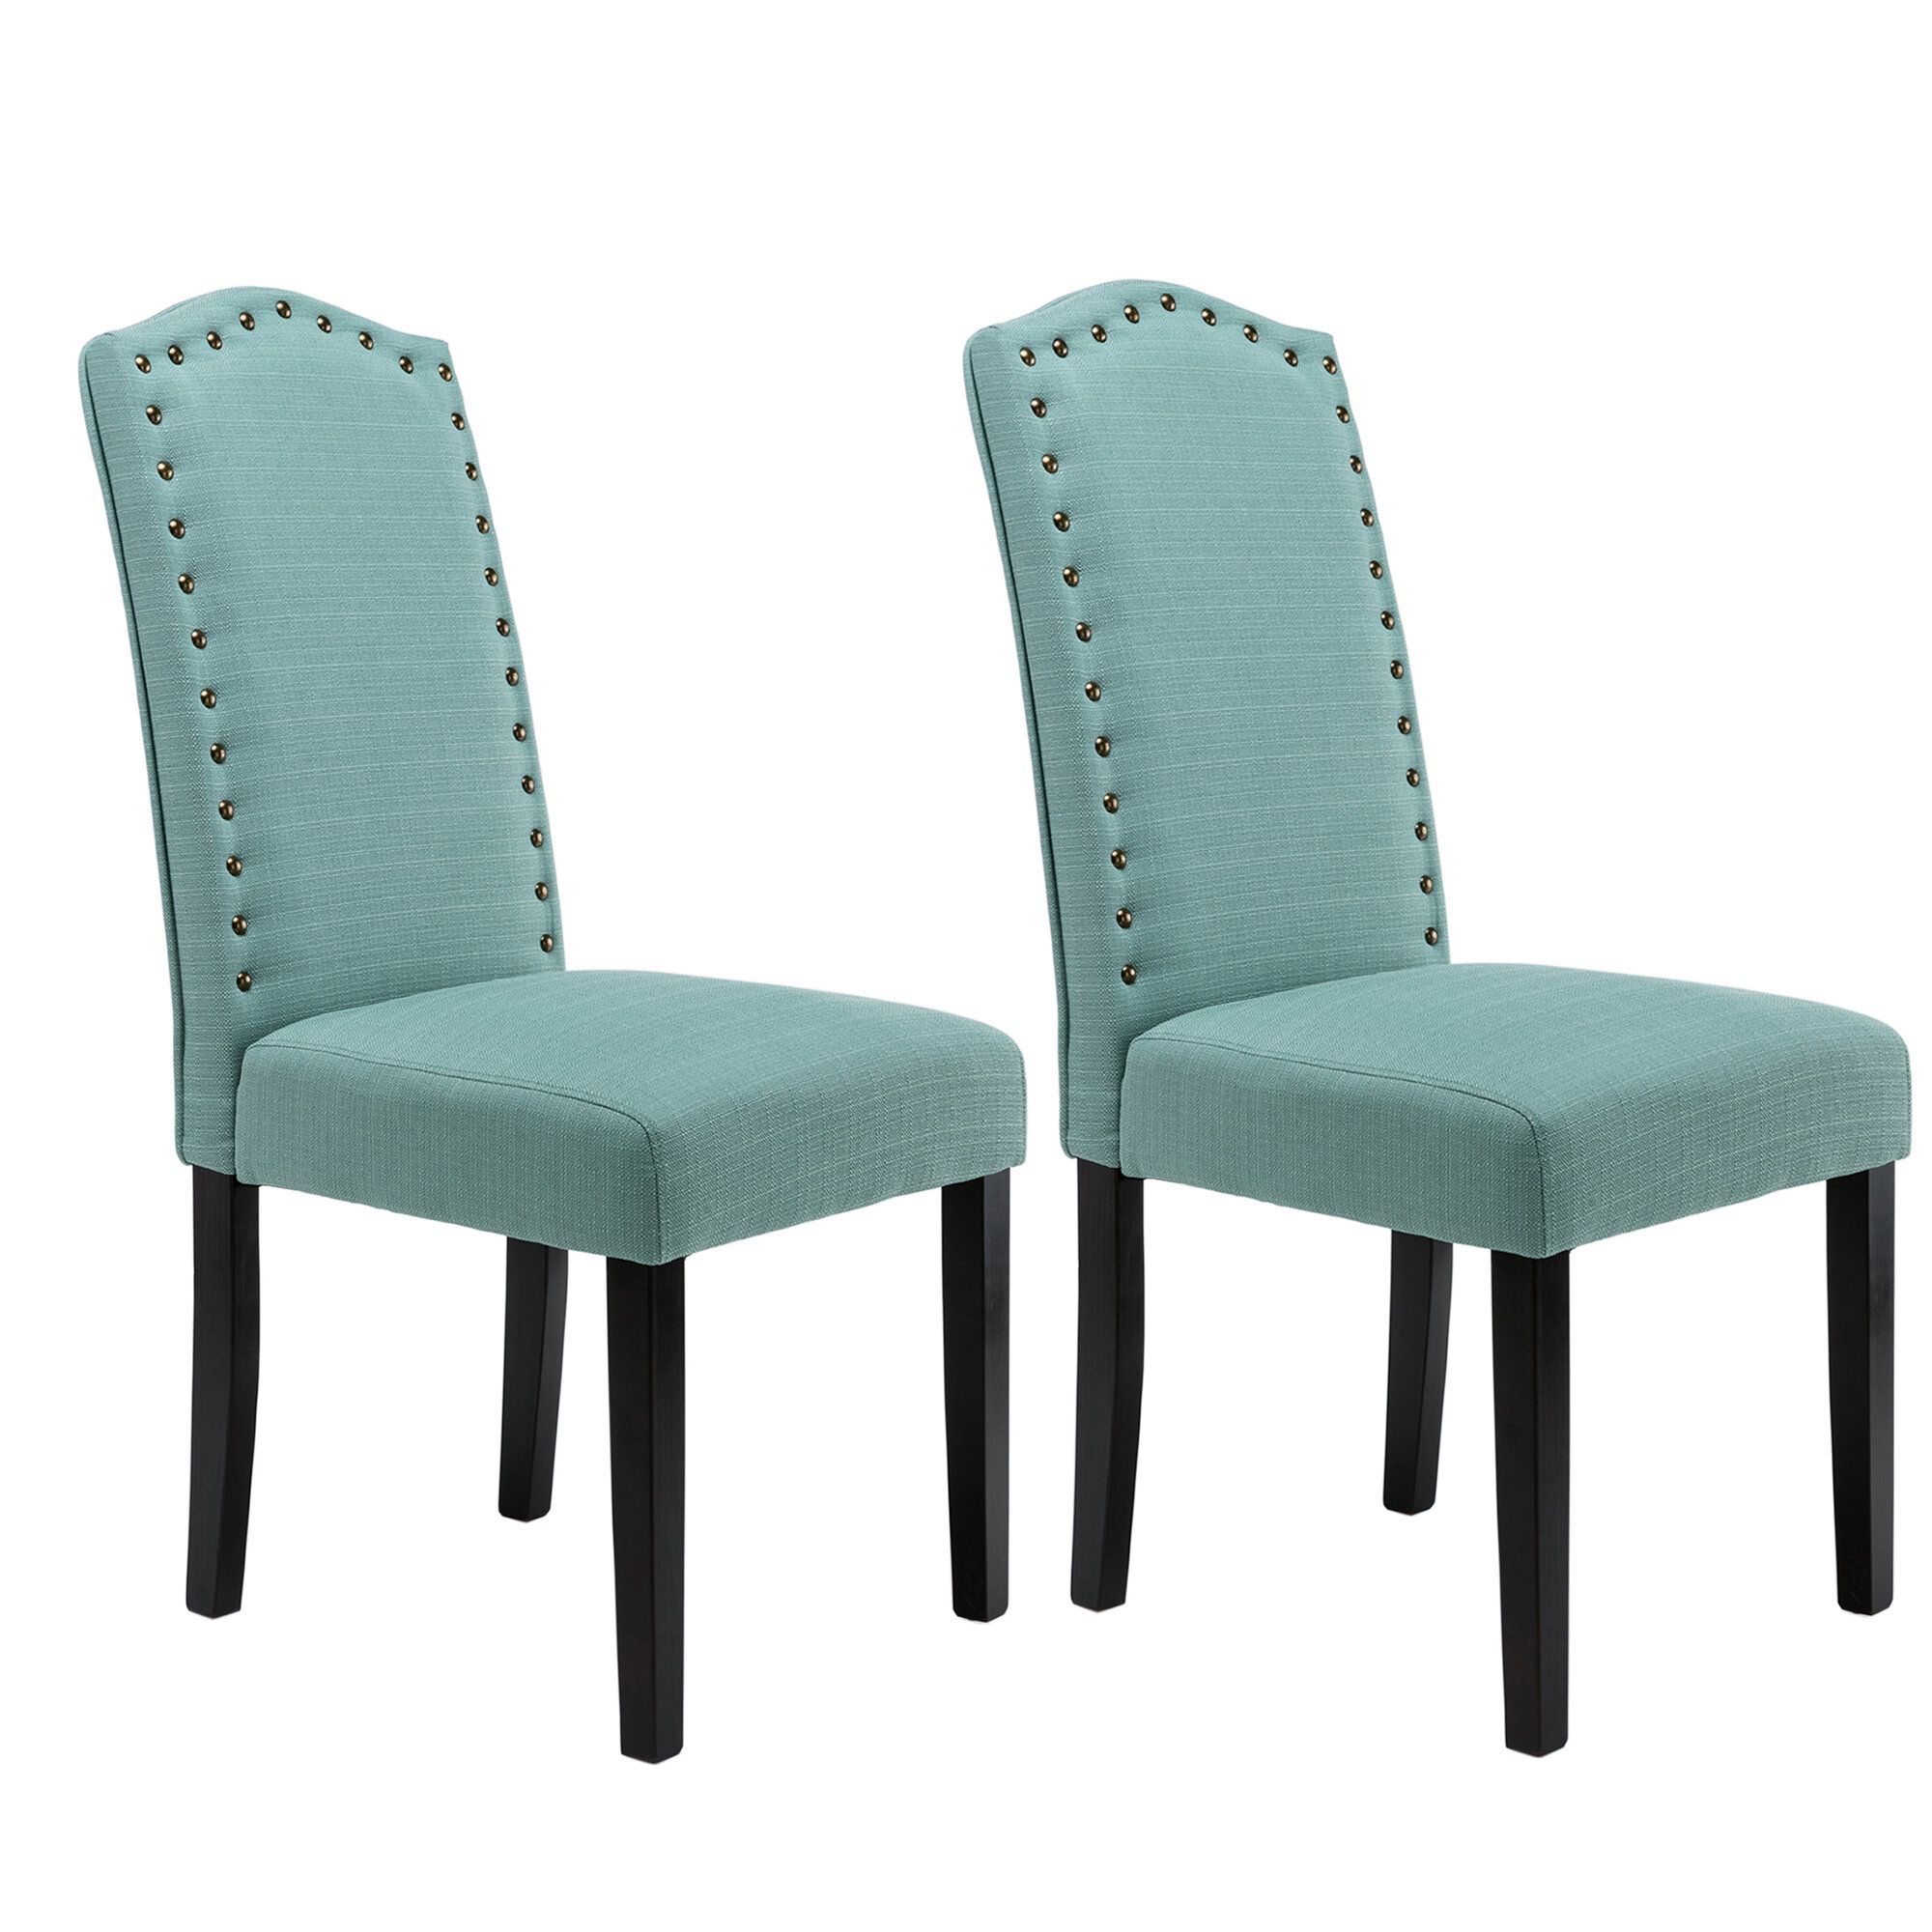 Parsons Accent Chairs You'Ll Love In 2021 | Wayfair In Aime Upholstered Parsons Chairs In Beige (View 13 of 15)